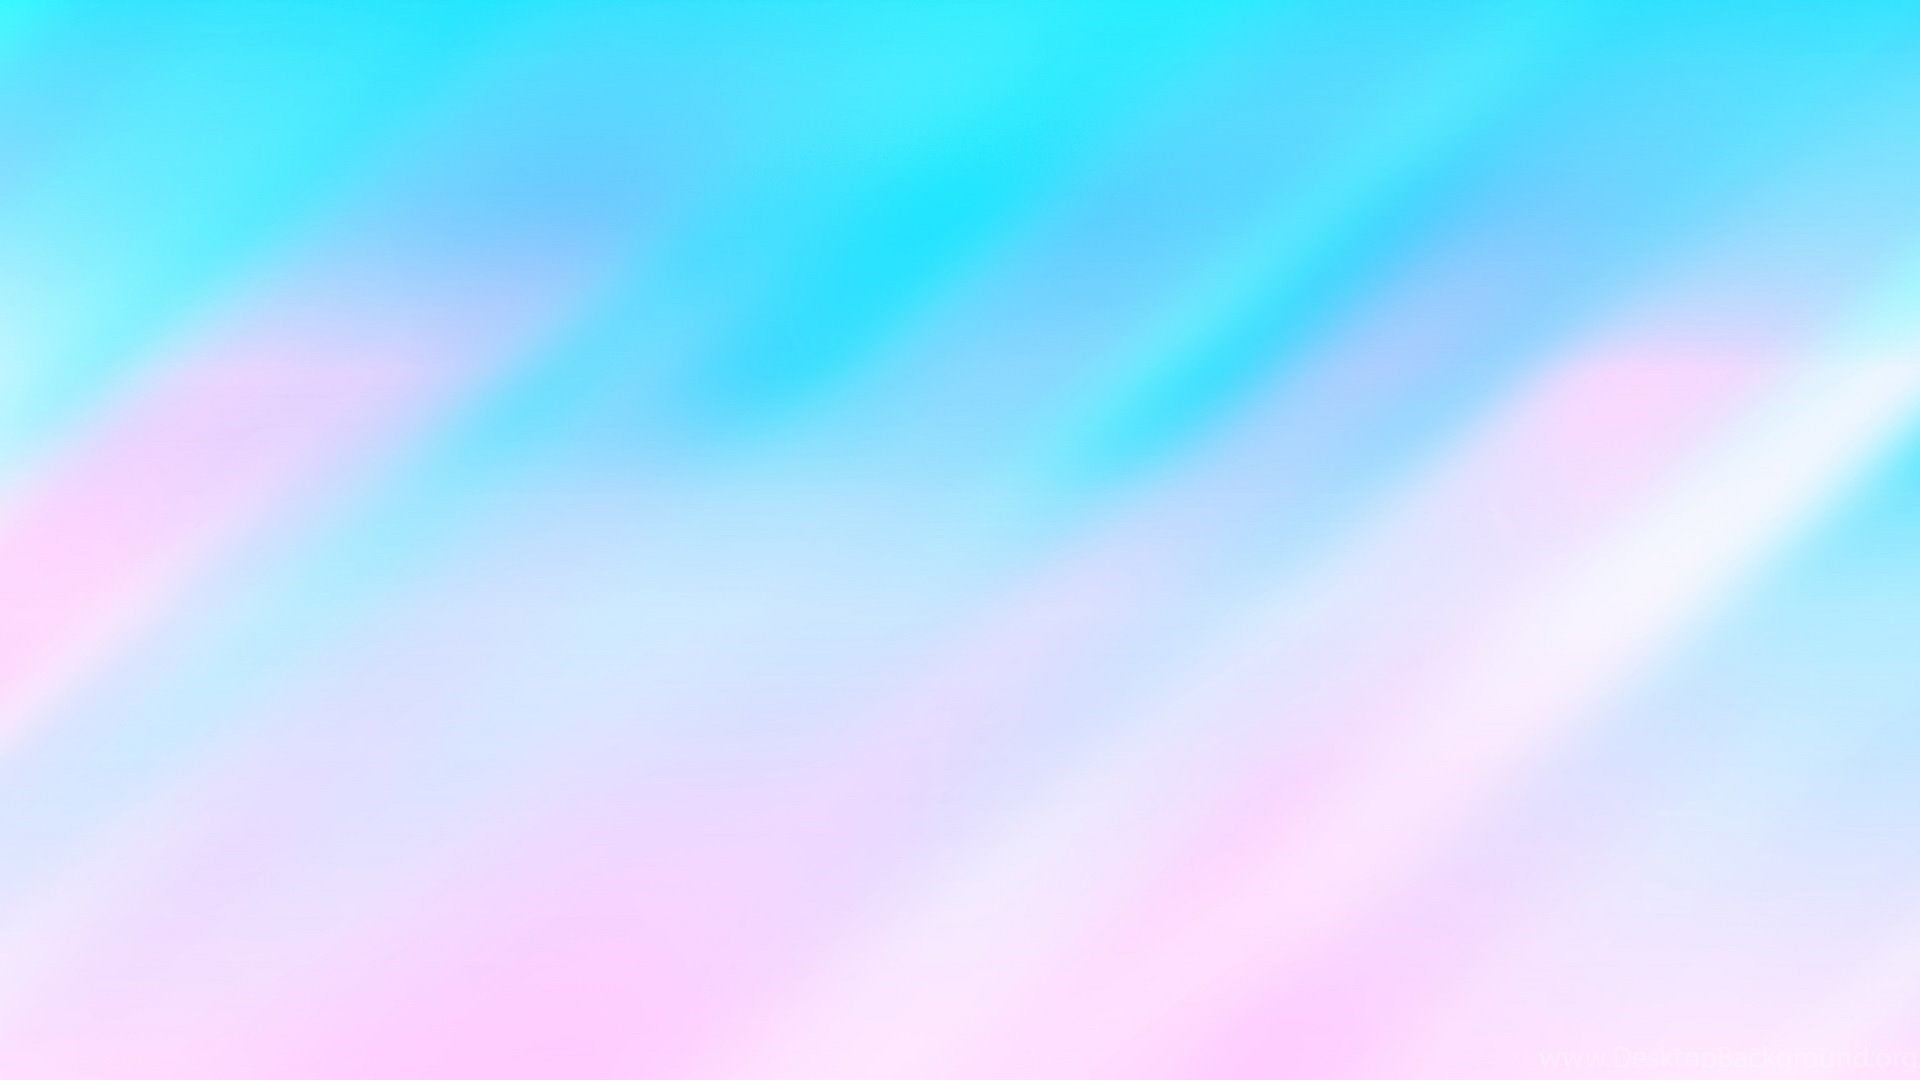 244 Pastel Hd Wallpapers Data Src Pastel Wallpaper - Pink And Blue  Backgrounds - 1920x1080 Wallpaper 